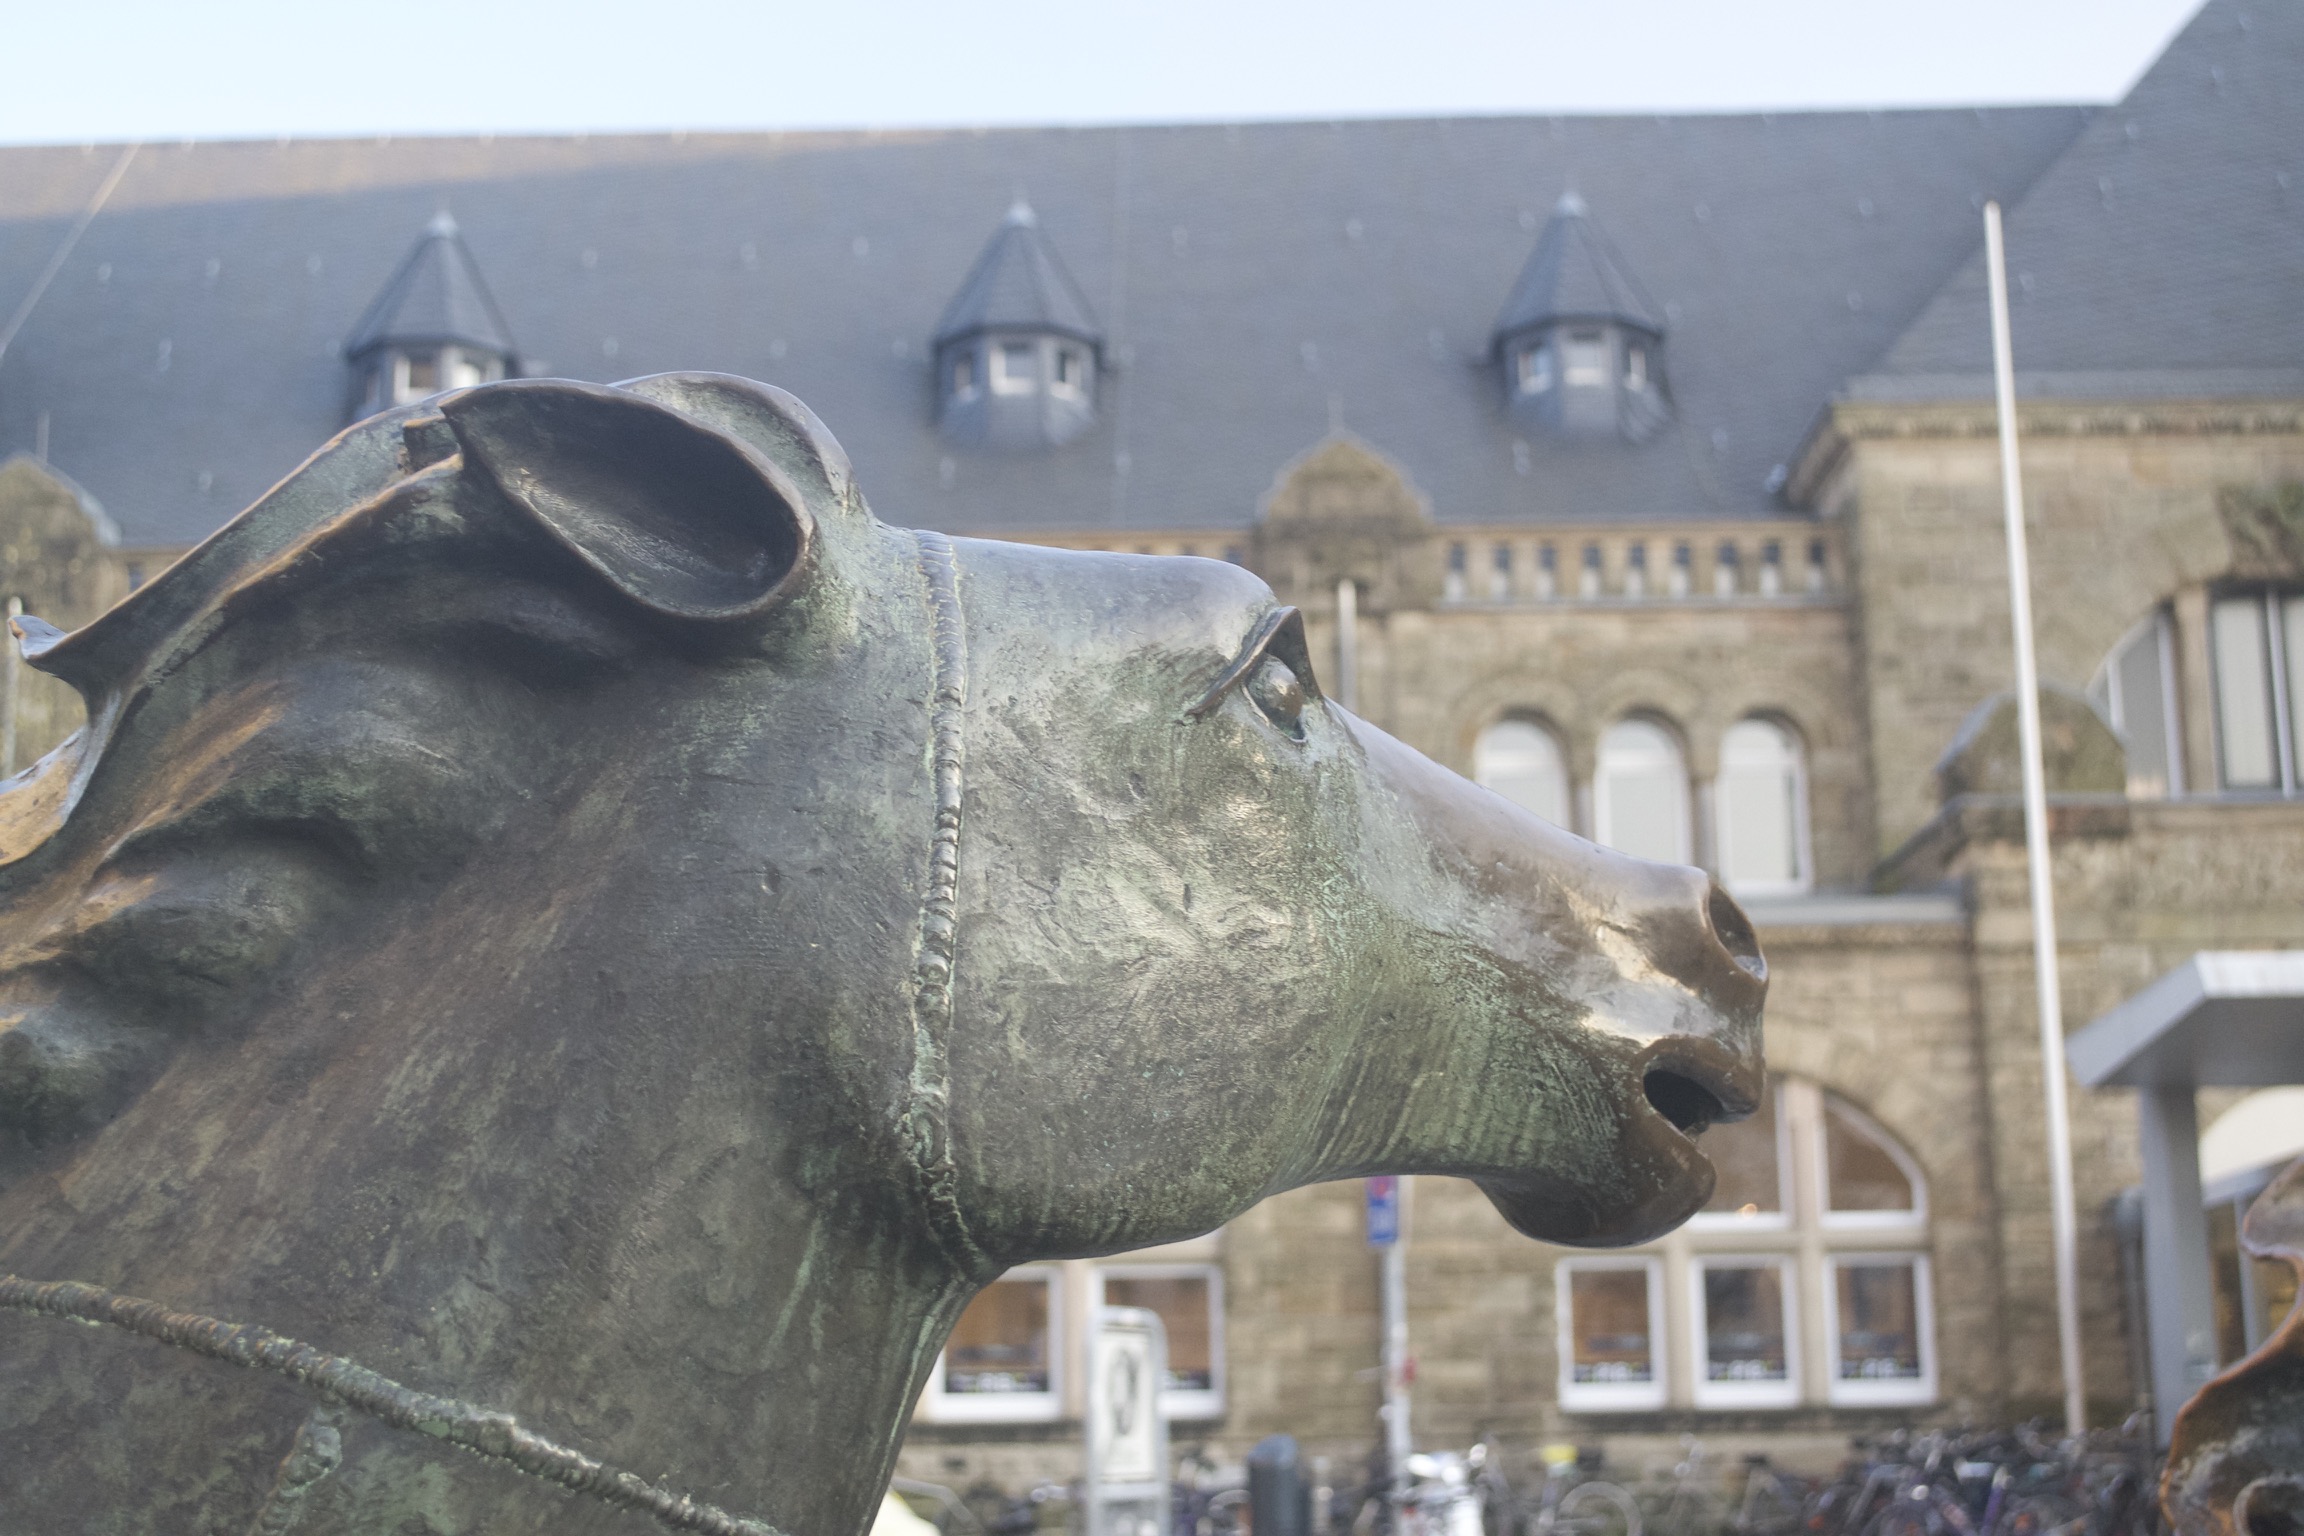 A horse statue in front of a brown train station.